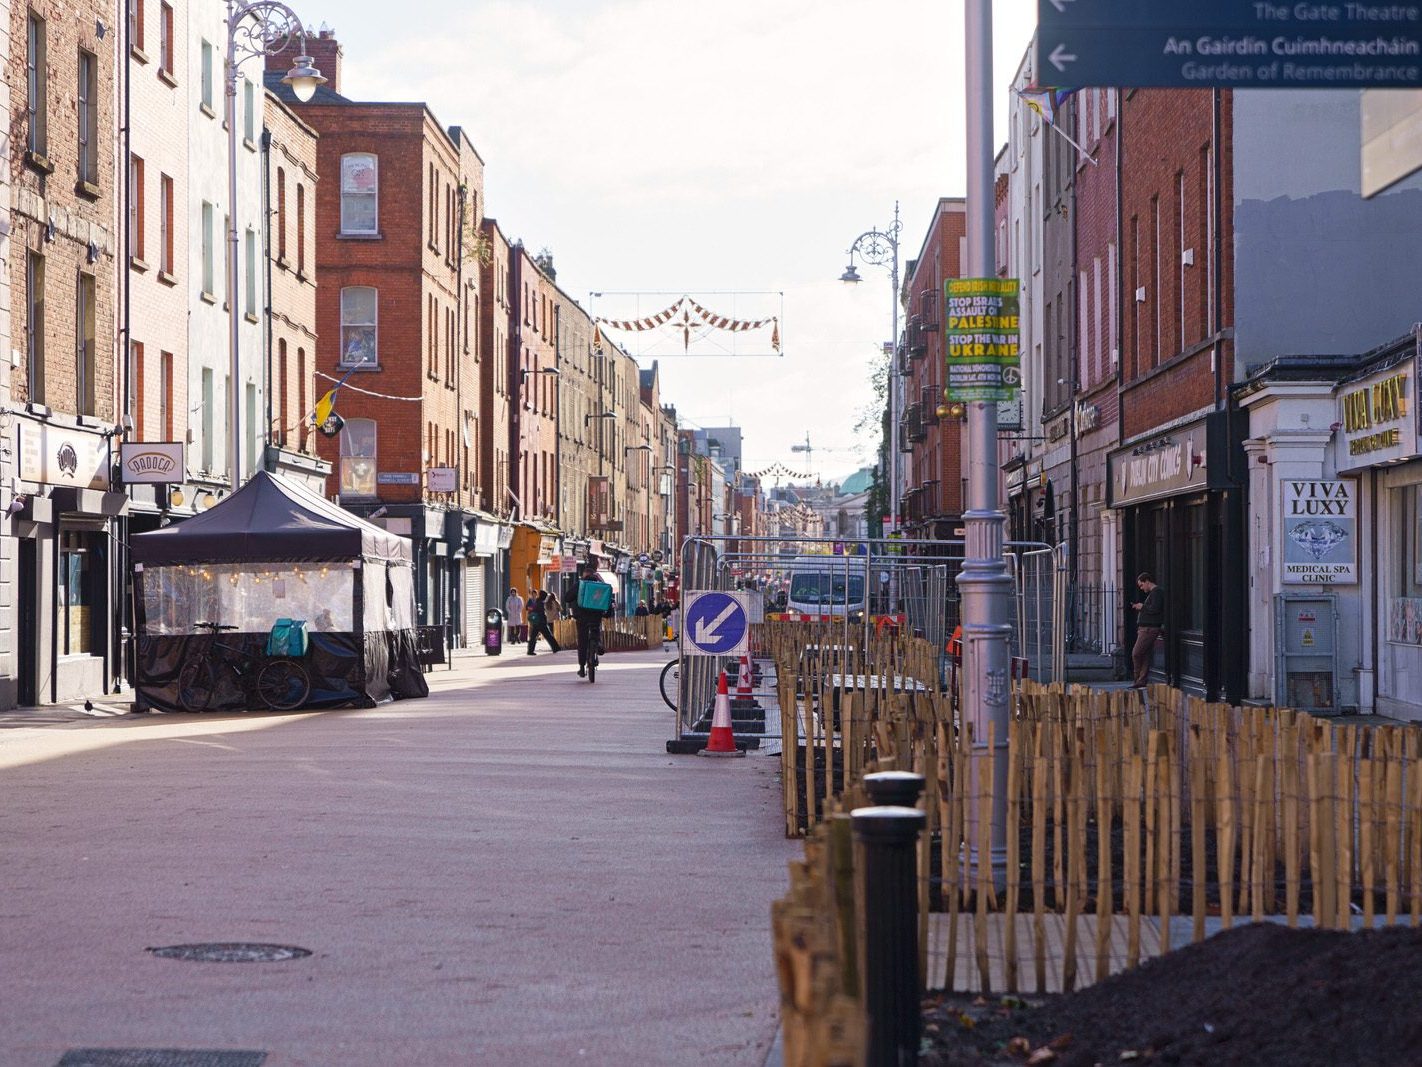 CAPEL STREET IS STILL A W.I.P. [THE PERIOD BETWEEN HALLOWEEN AND CHRISTMAS]-224777-1